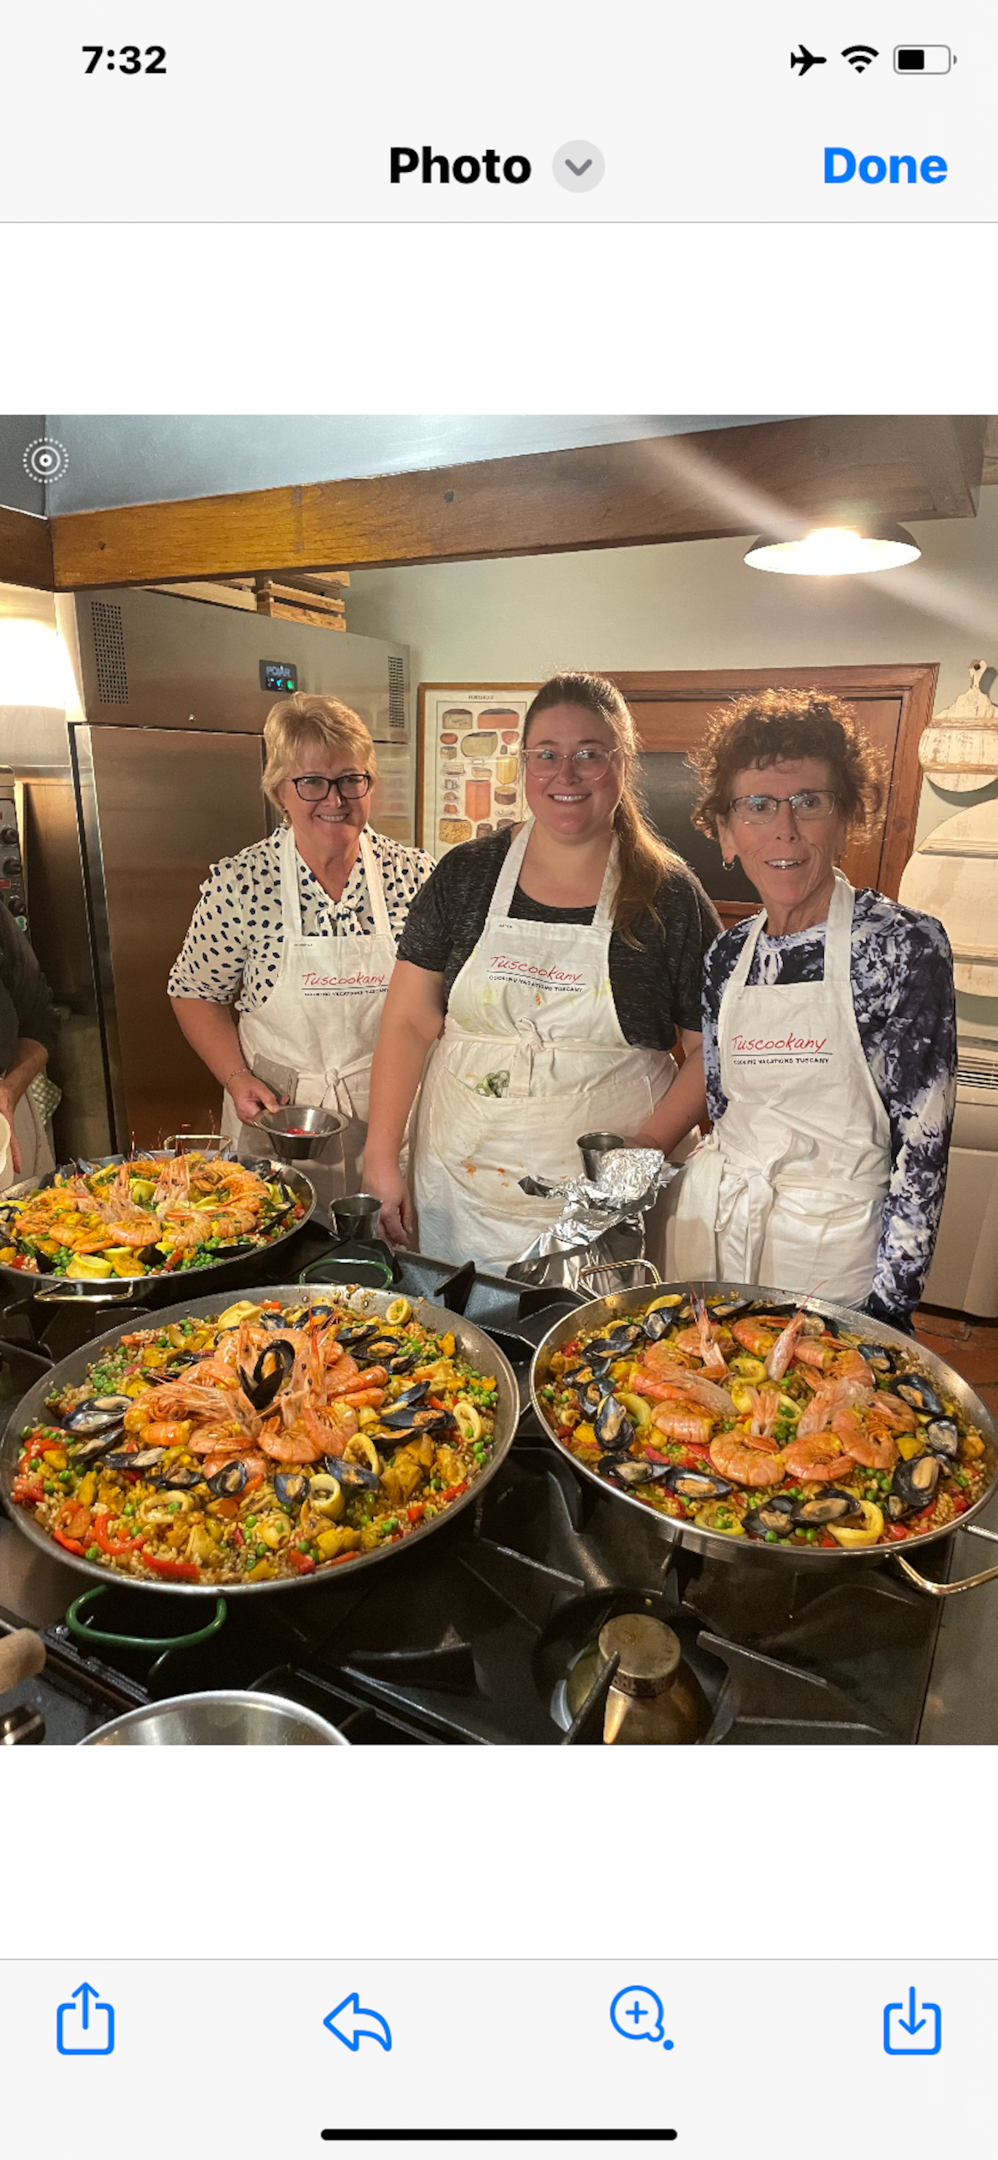 Tuscookany Cooking Class in Italy-YEP THAT IS ME ON THE LEFT!